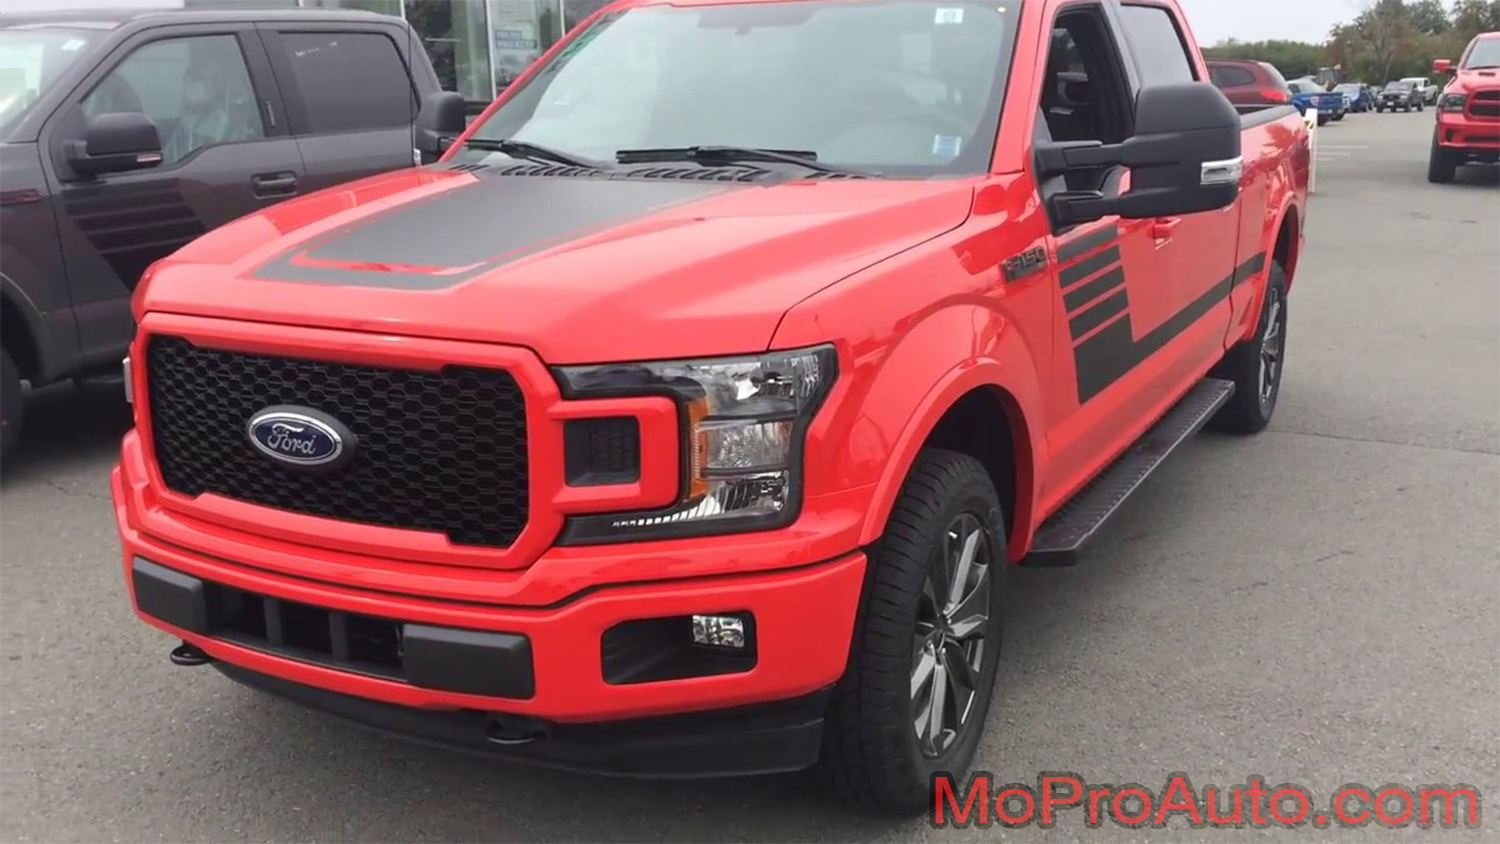 2015, 2016, 2017, 2018, 2019, 2020 LEAD FOOT HOOD Special Edition Ford F-Series F-150 Appearance Package Vinyl Graphics and Decals Kit by MoProAuto Pro Design Series